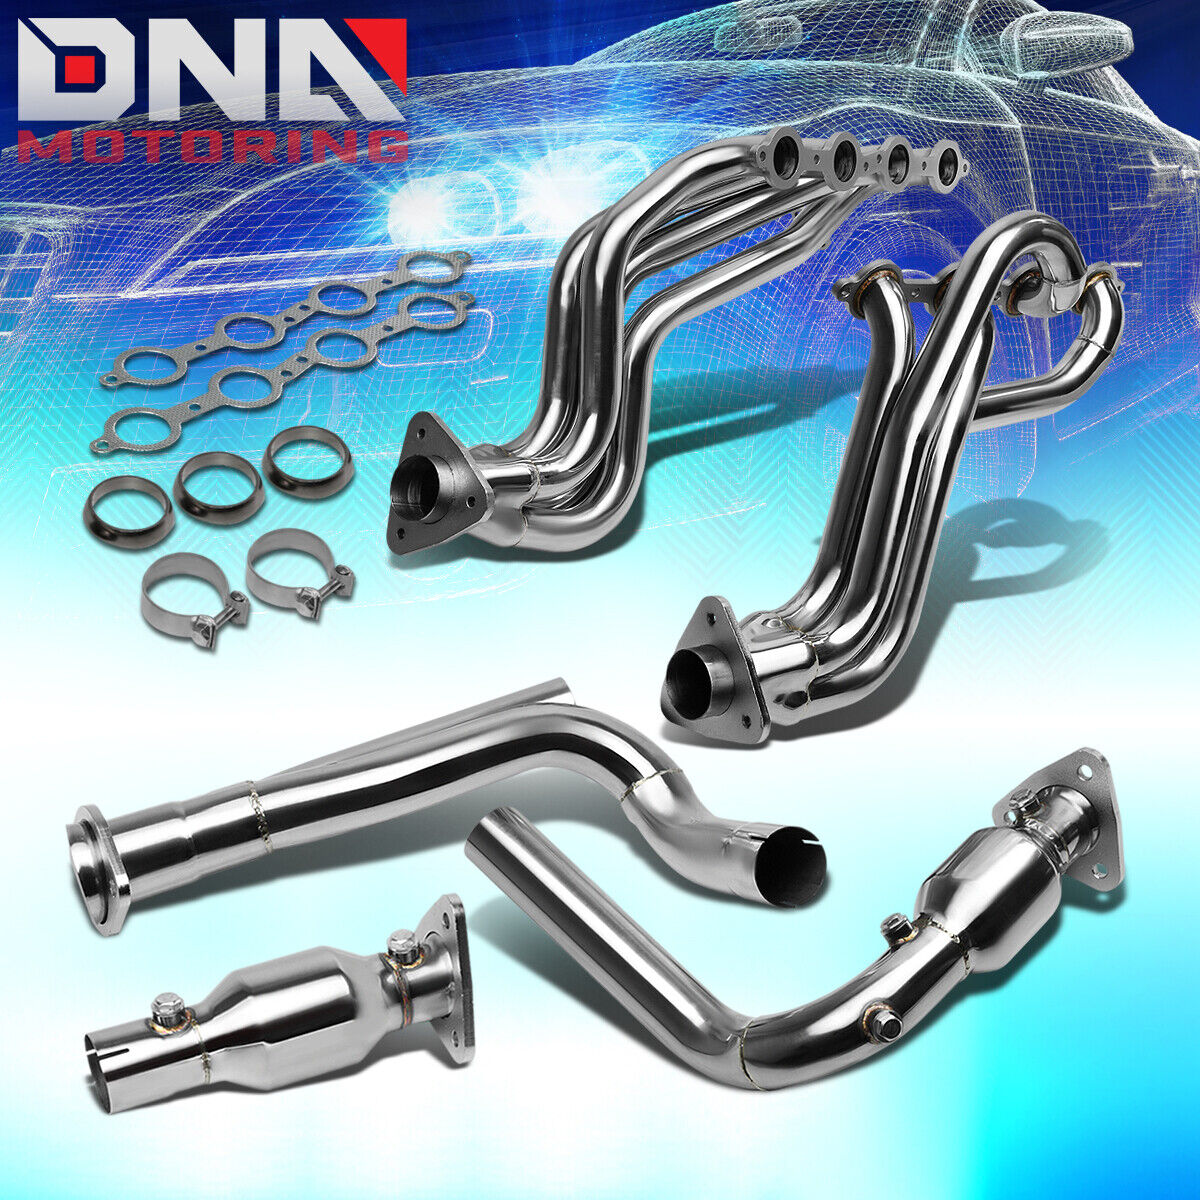 STAINLESS STEEL HEADER+Y-PIPE FOR AVALANCHE/SILVERADO/SUBURBAN EXHAUST/MANIFOLD